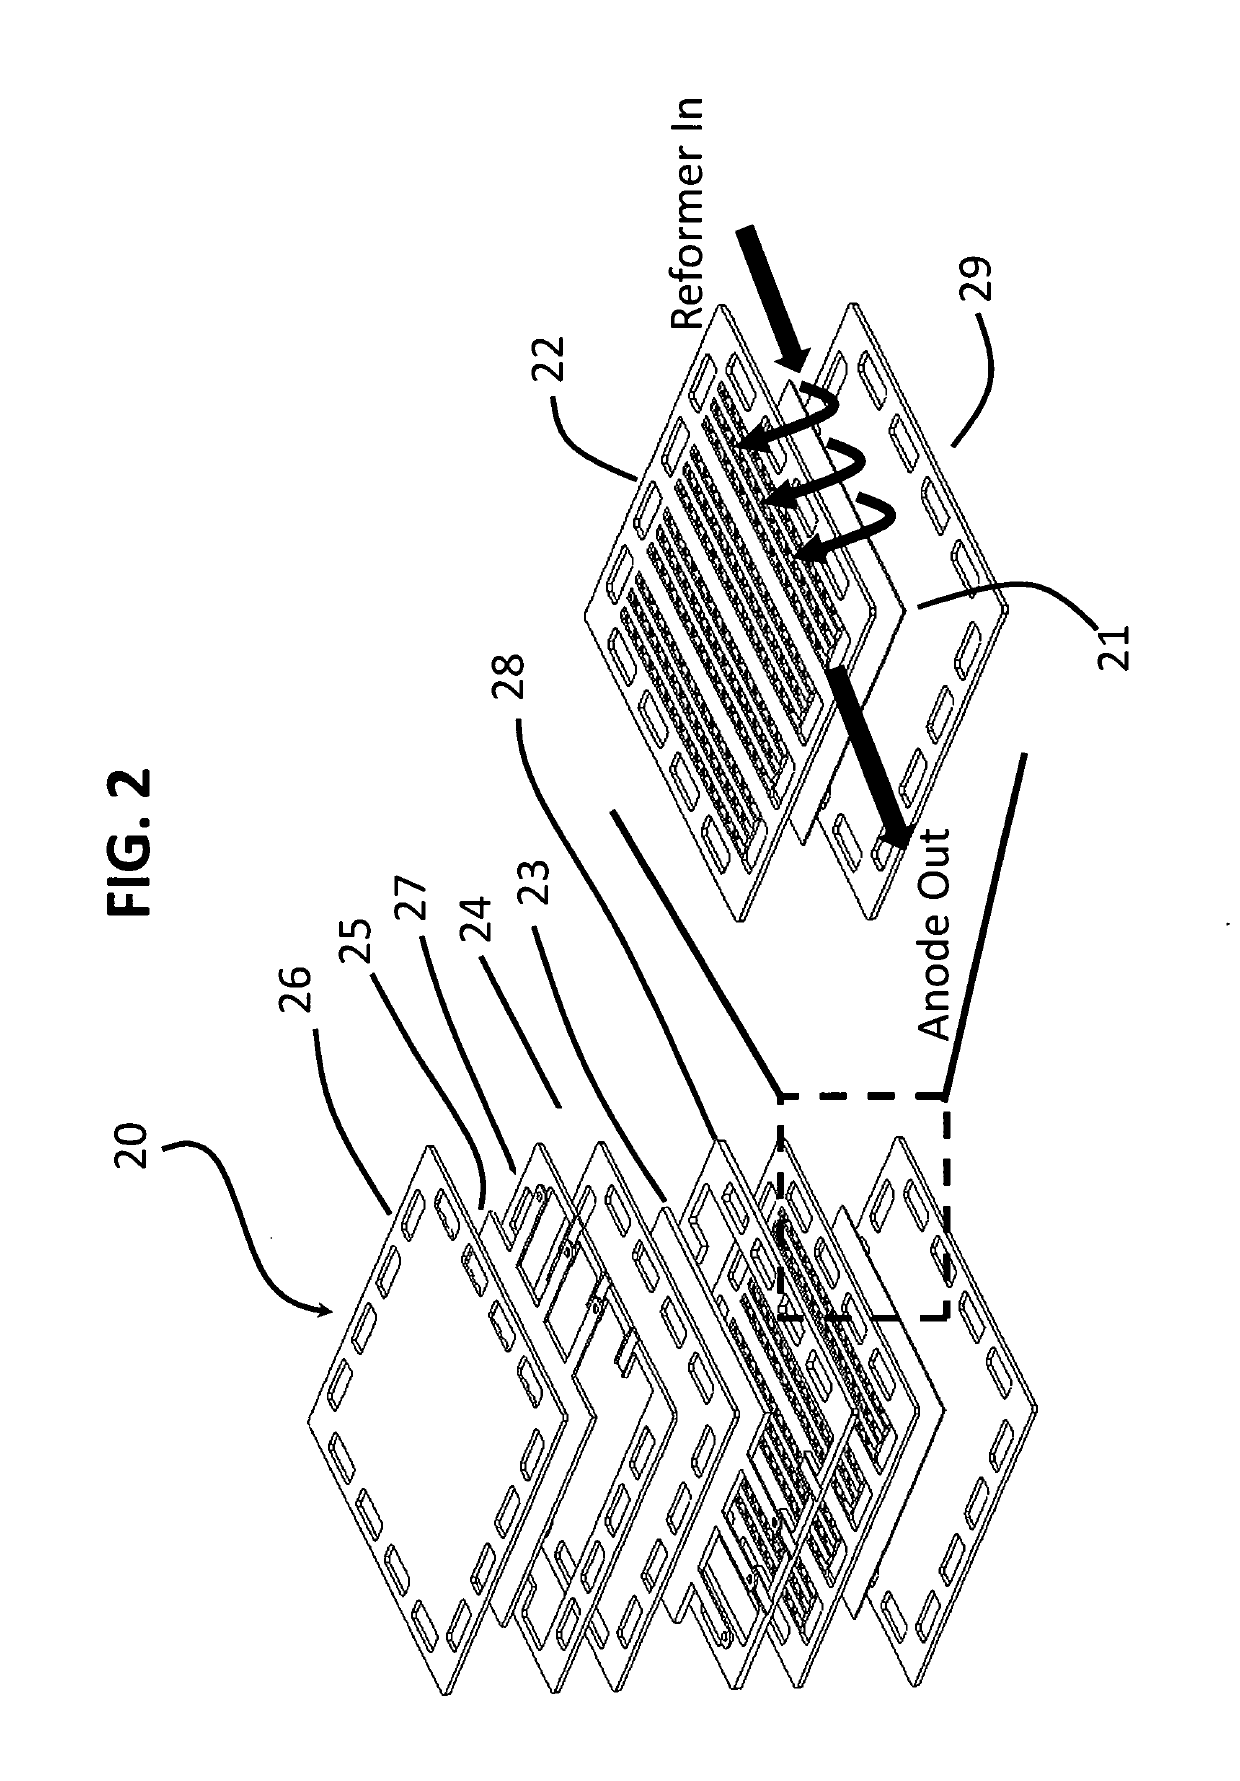 Solid oxide fuel cell with internal reformer